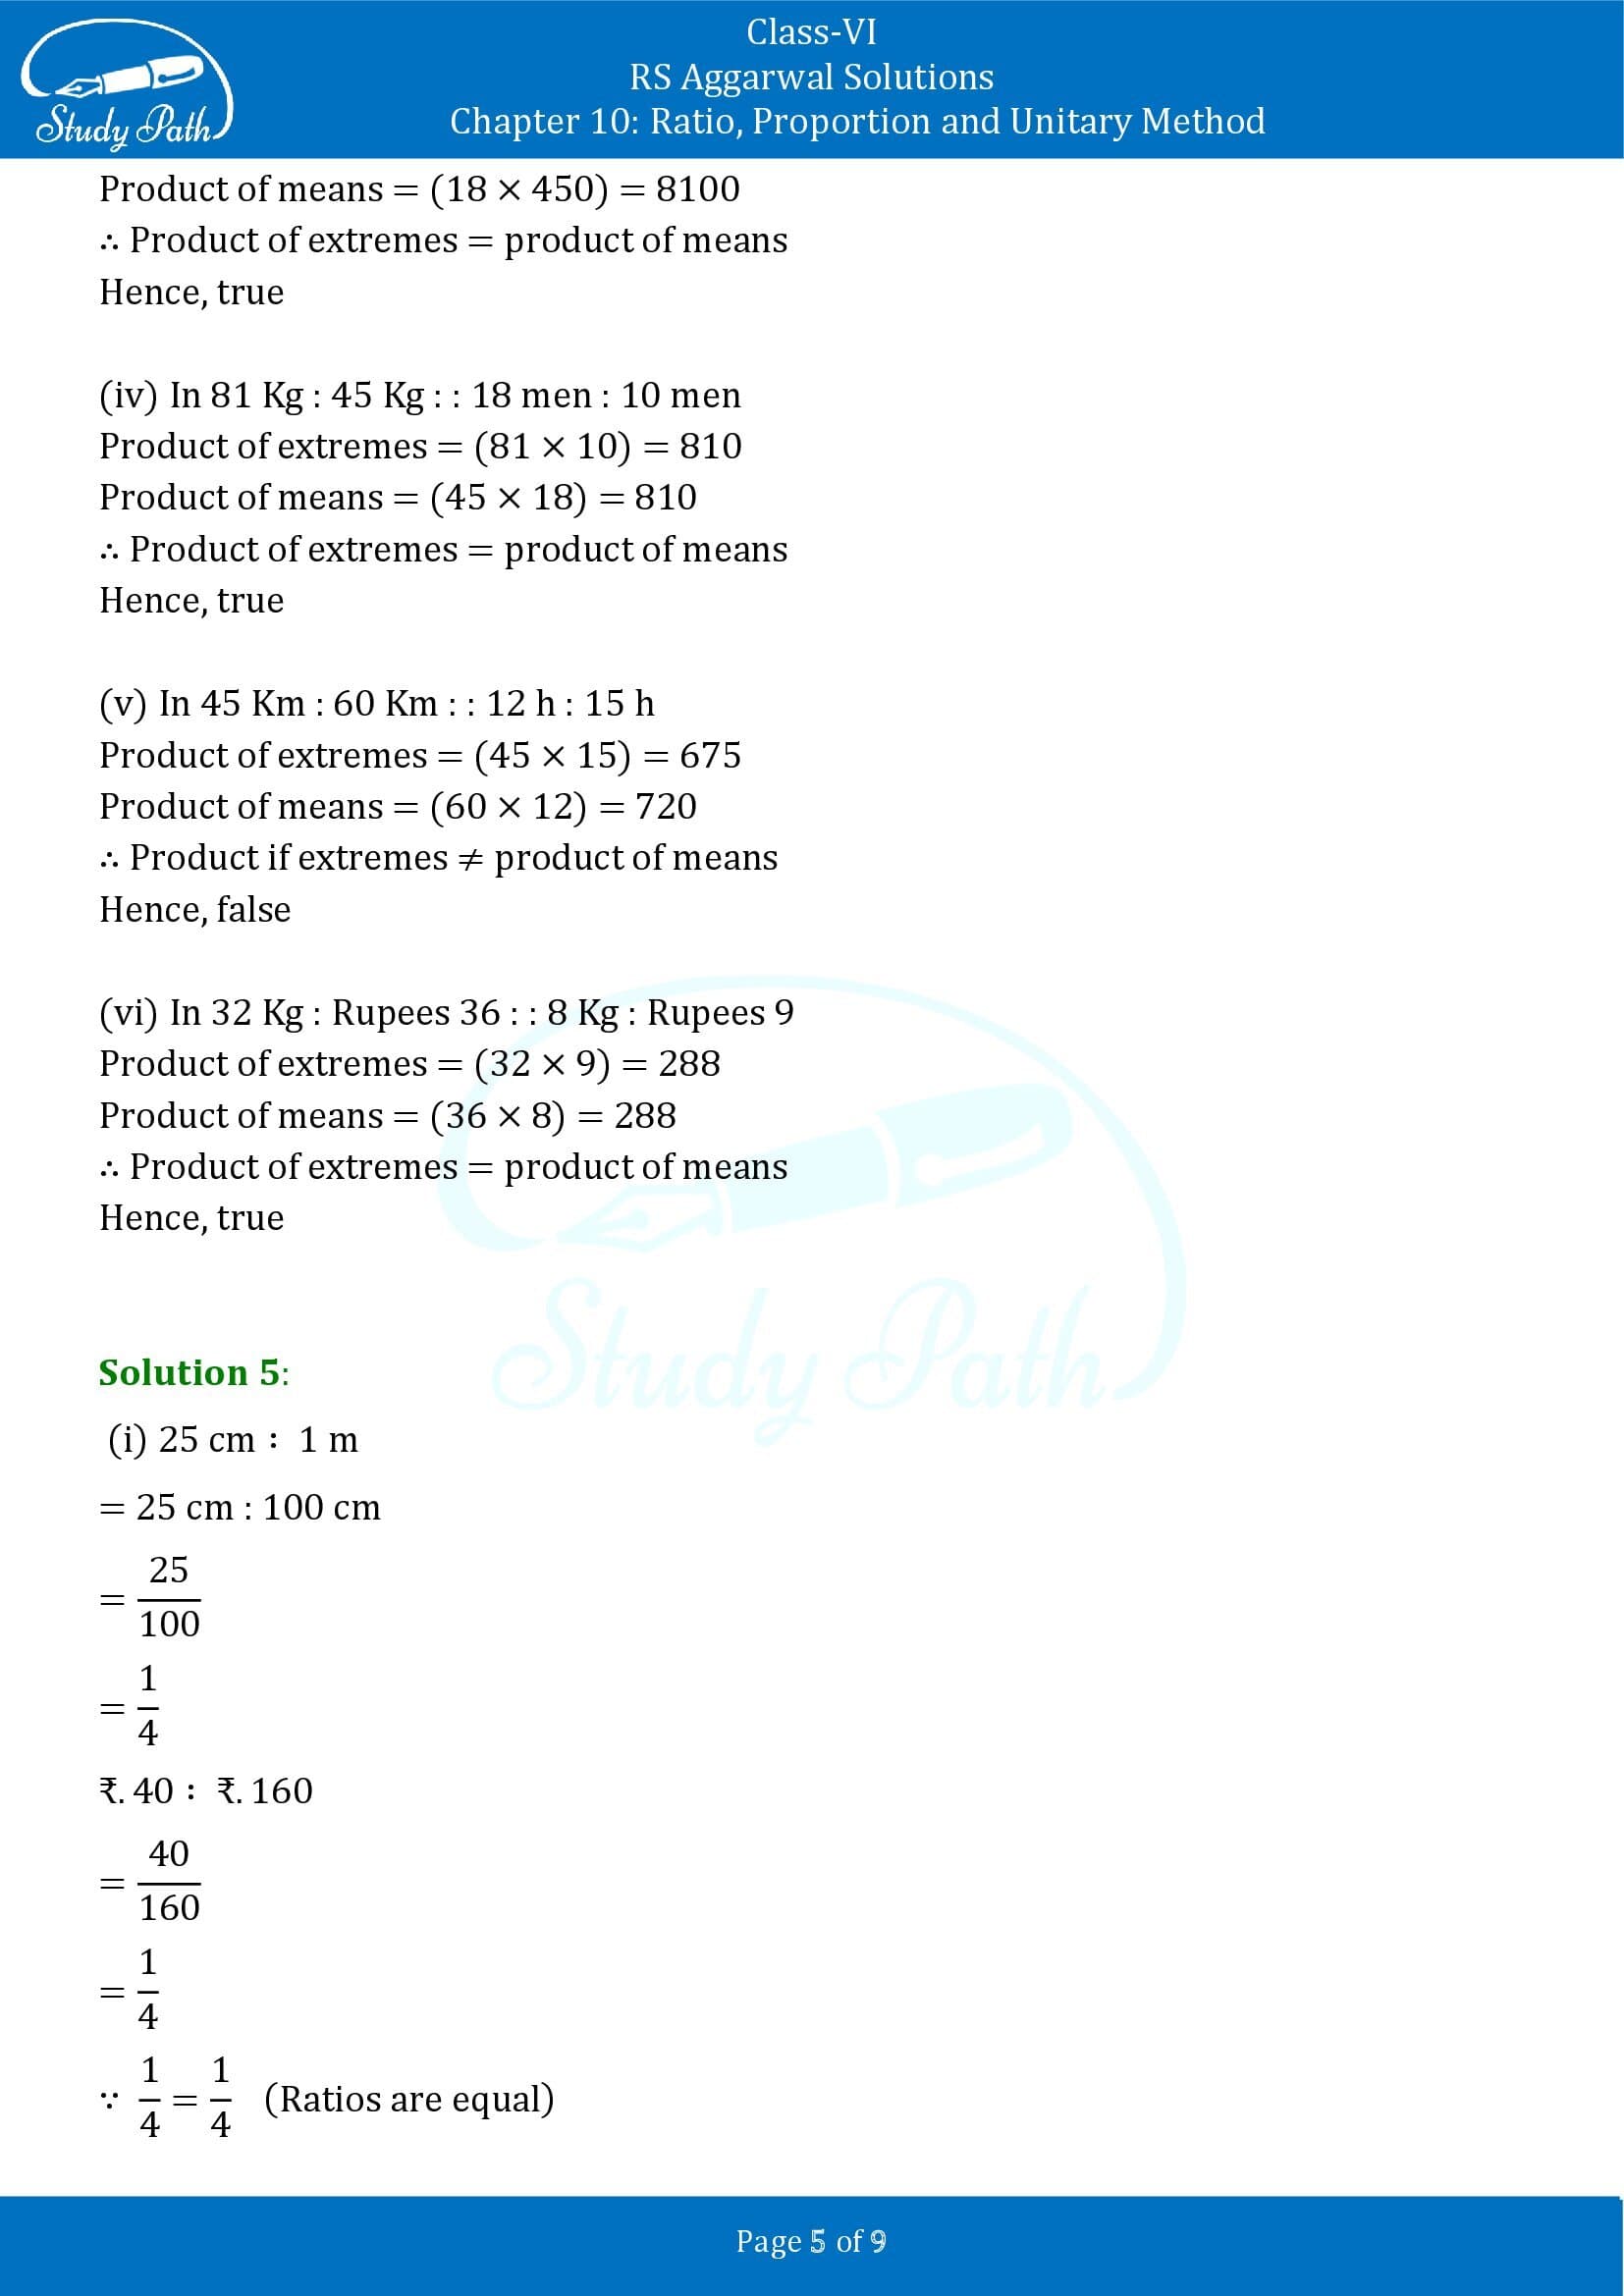 RS Aggarwal Solutions Class 6 Chapter 10 Ratio Proportion and Unitary Method Exercise 10B 00005